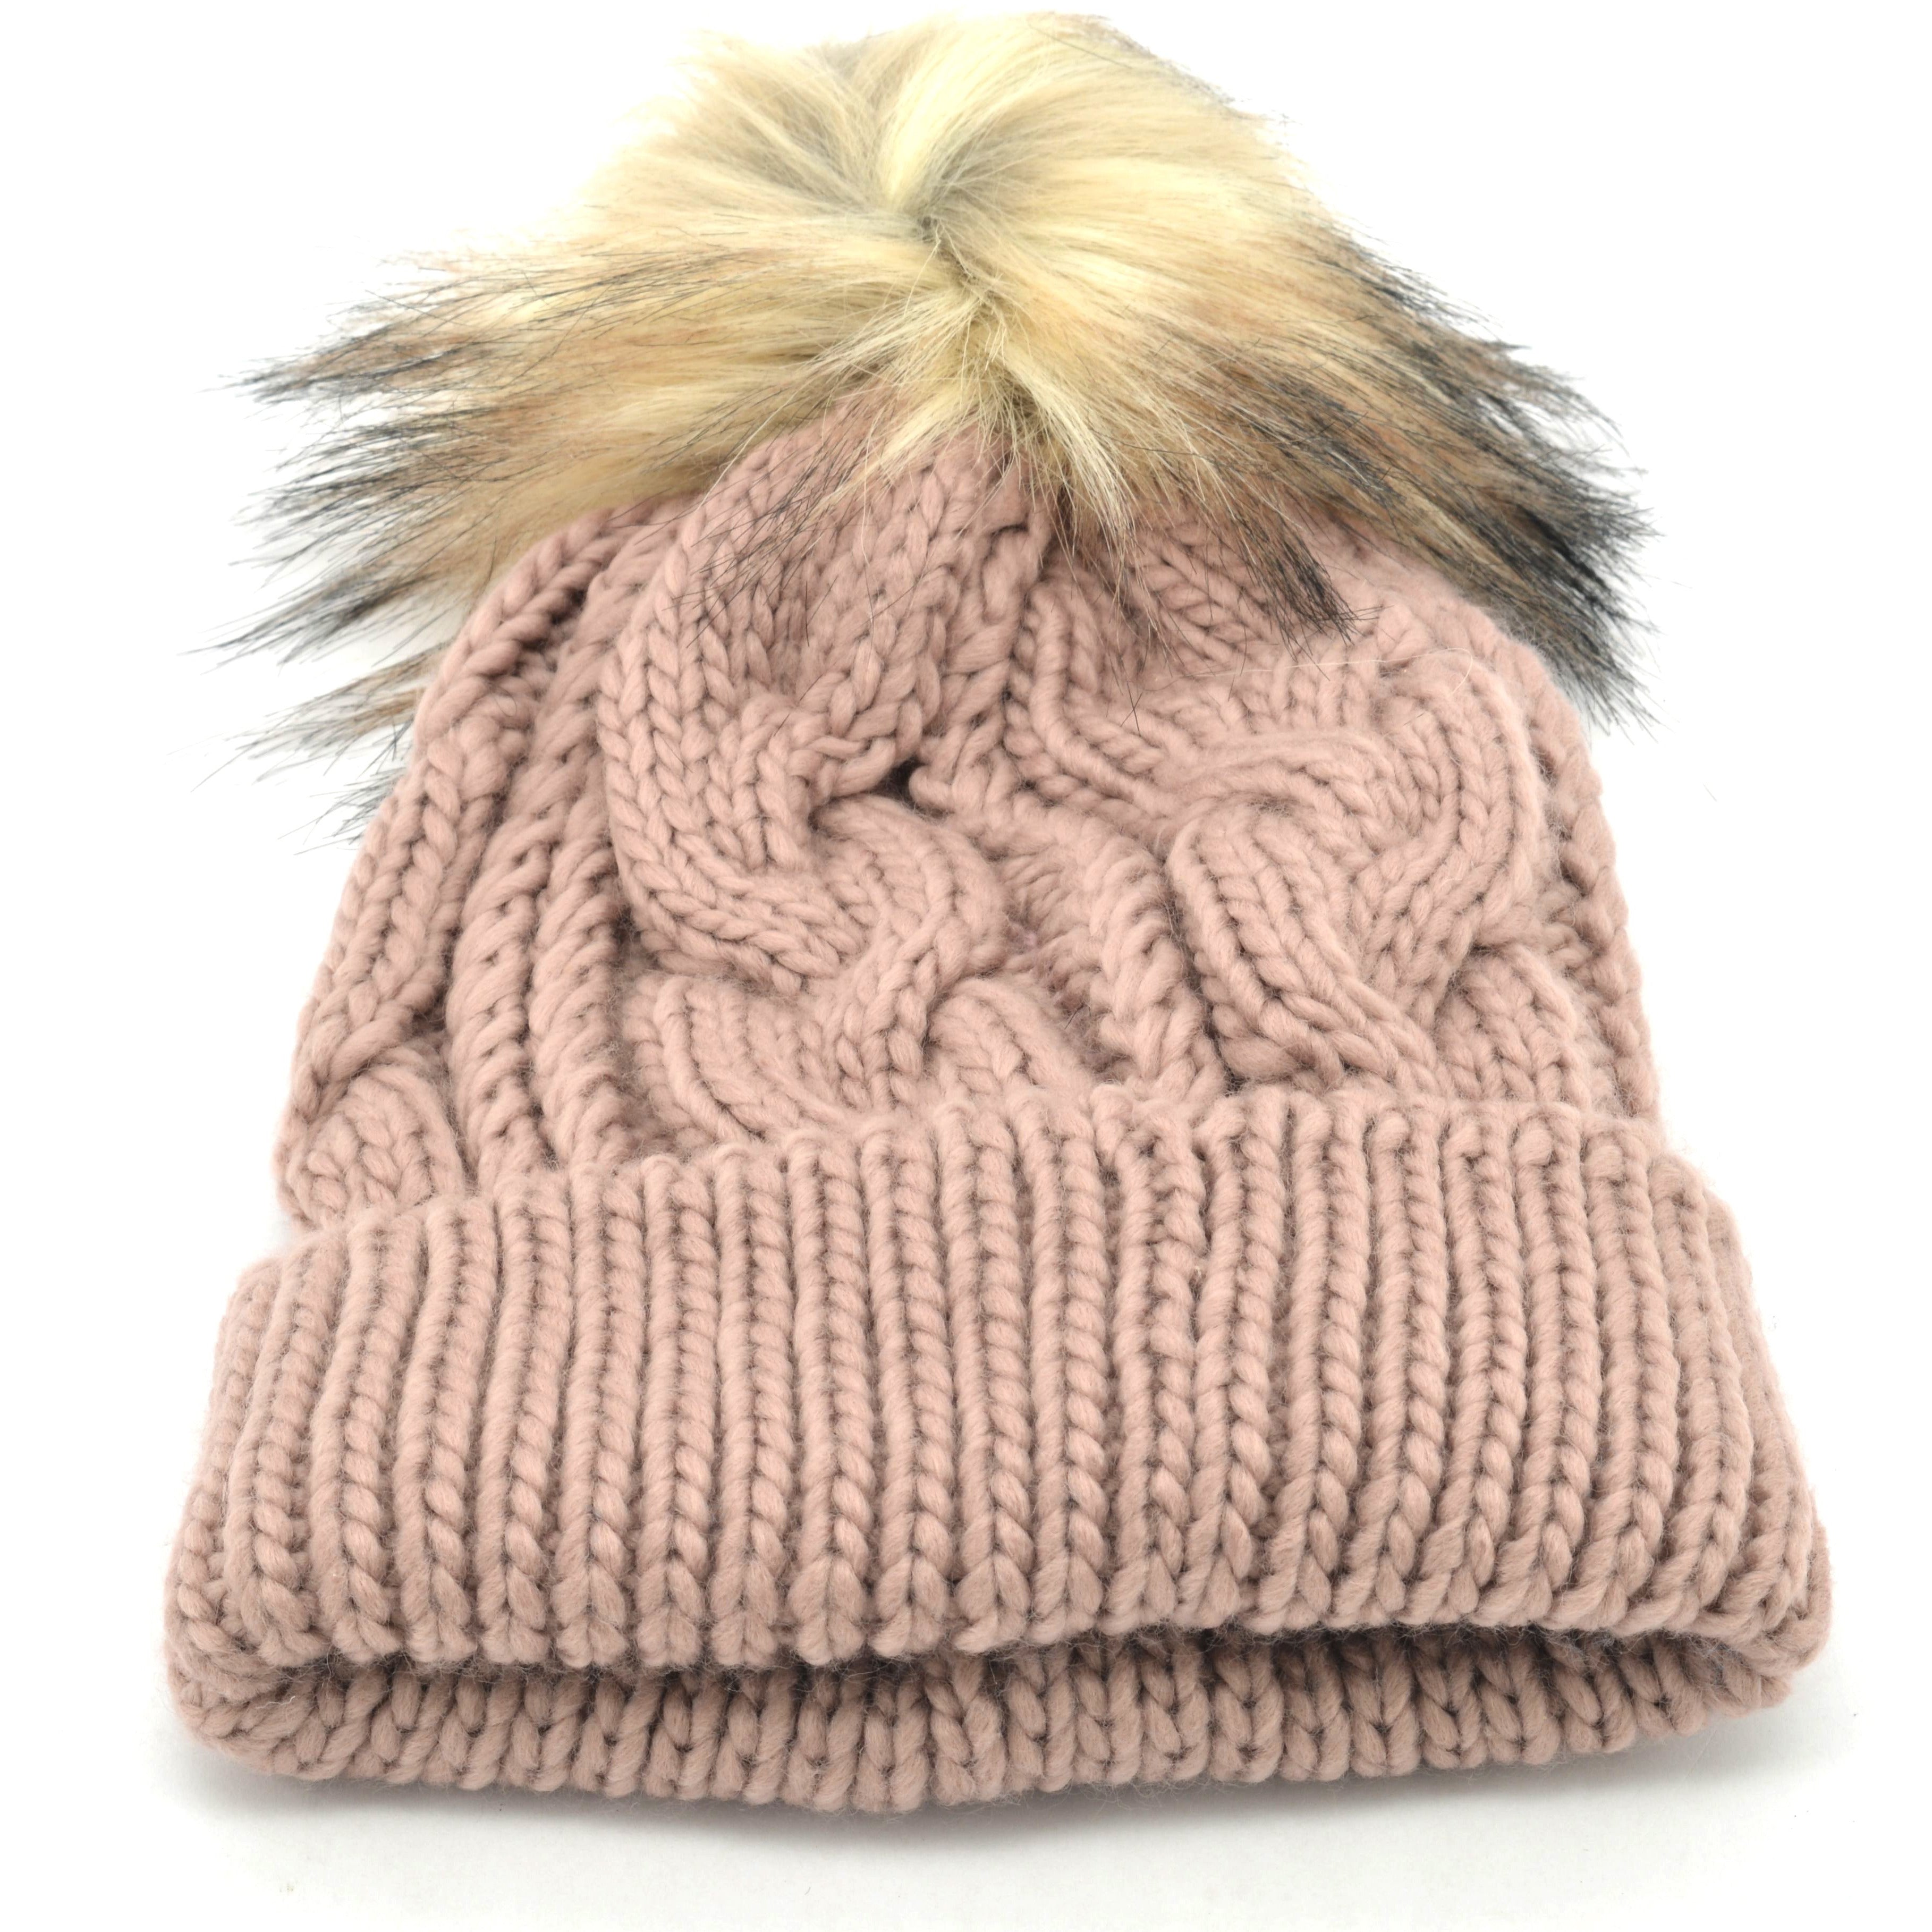 David and Young Ladies Cable Knit Winter Hat / Faux Fur Pom / Cuffed / 100% Acrylic